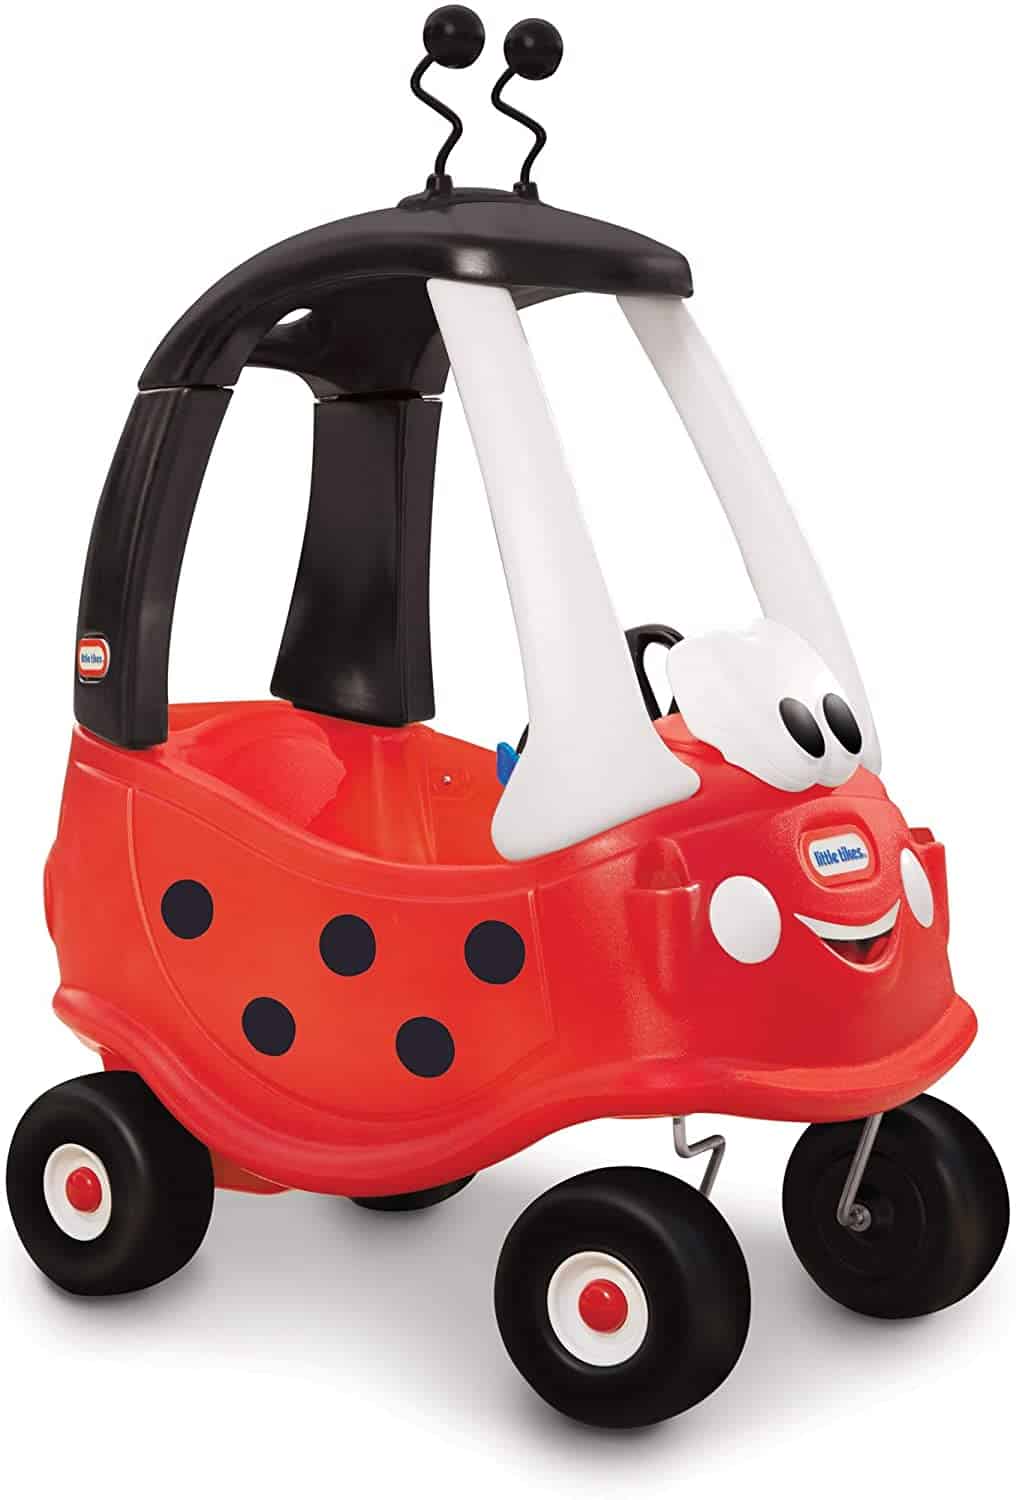 Cozy coupe car outdoor toys for toddlers